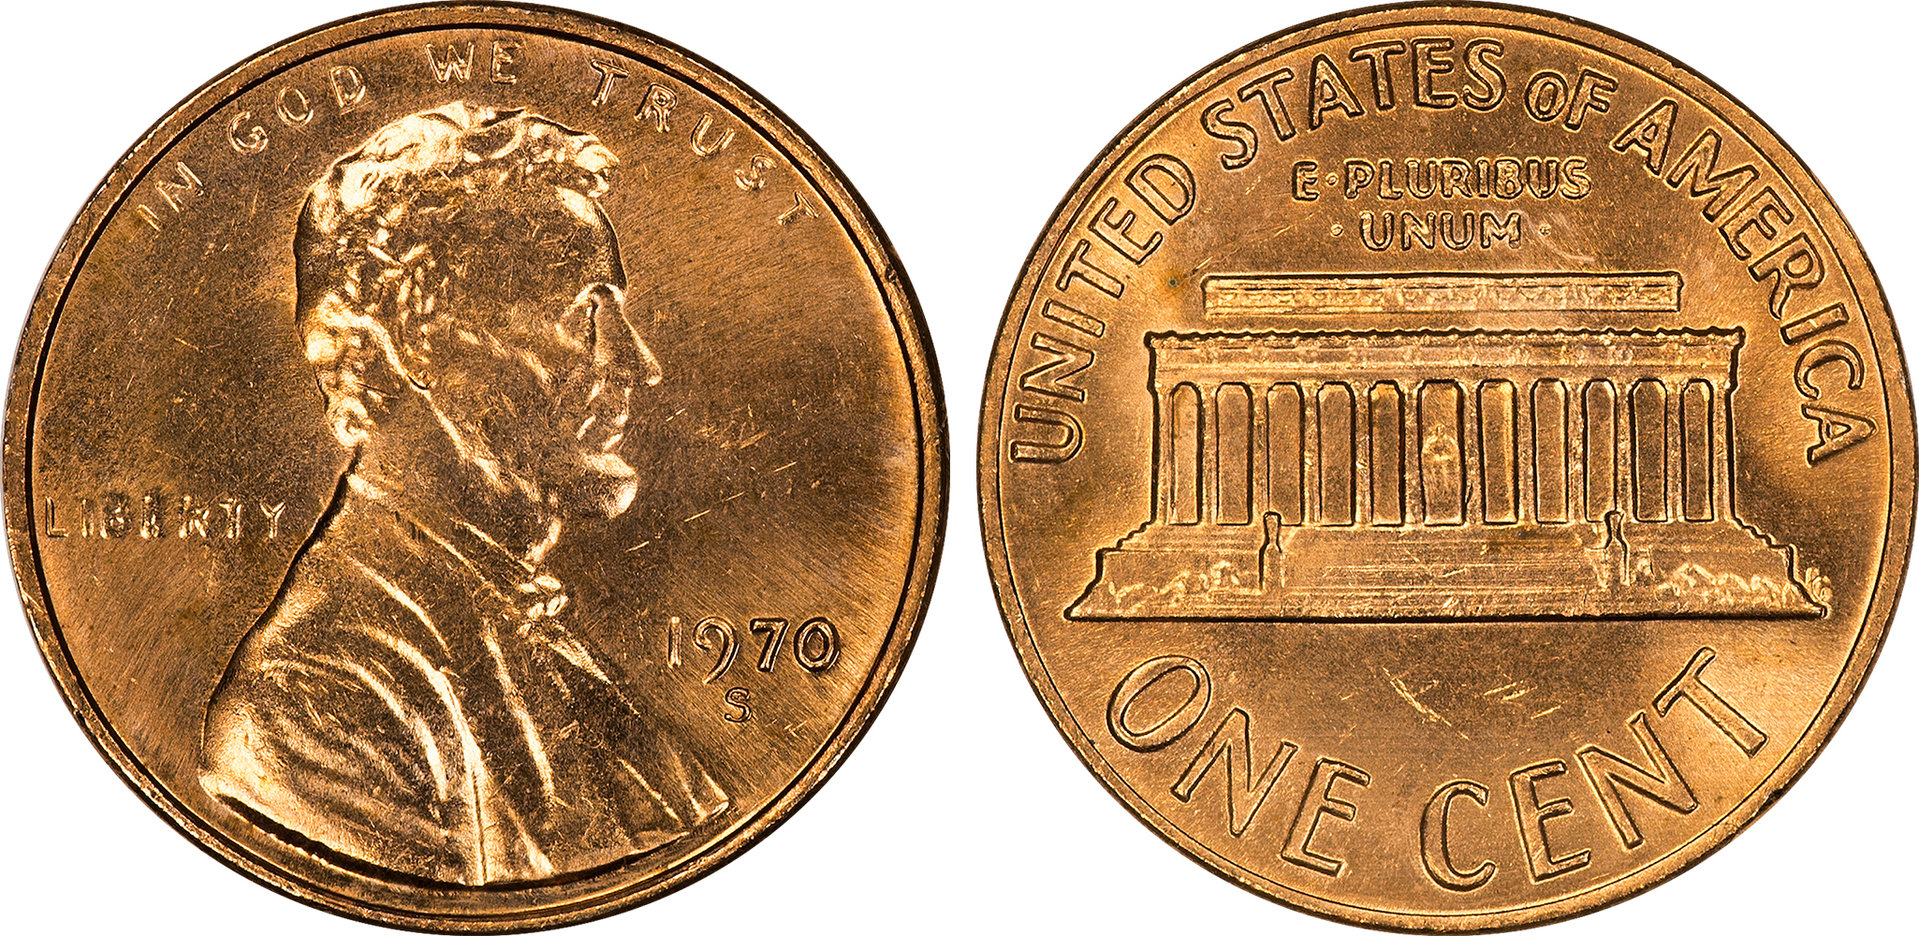 1970 S Small Date Lincoln Cent.jpg